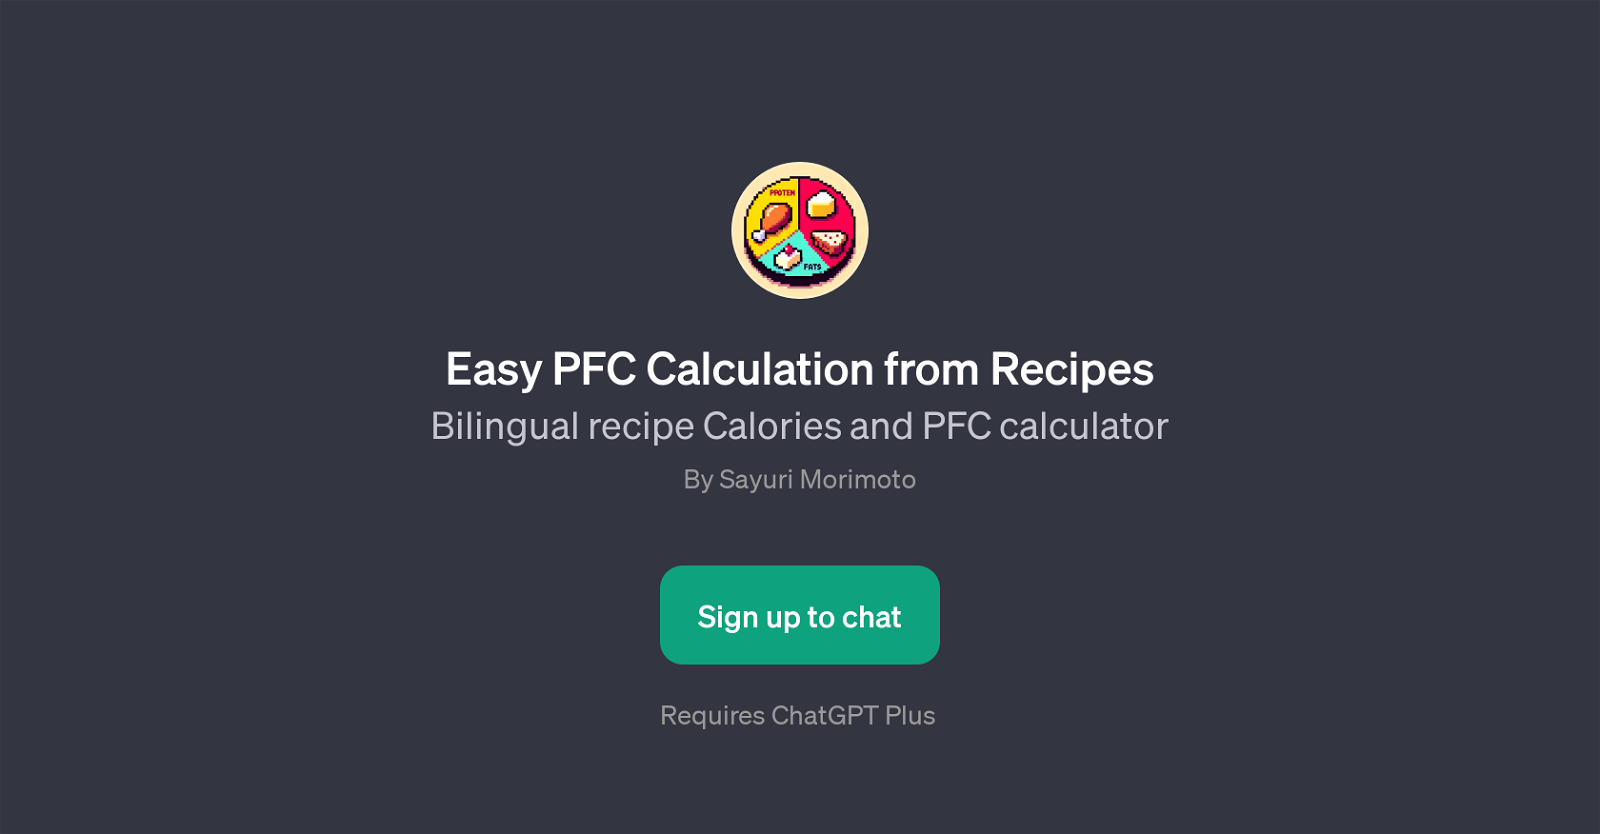 Easy PFC Calculation from Recipes website